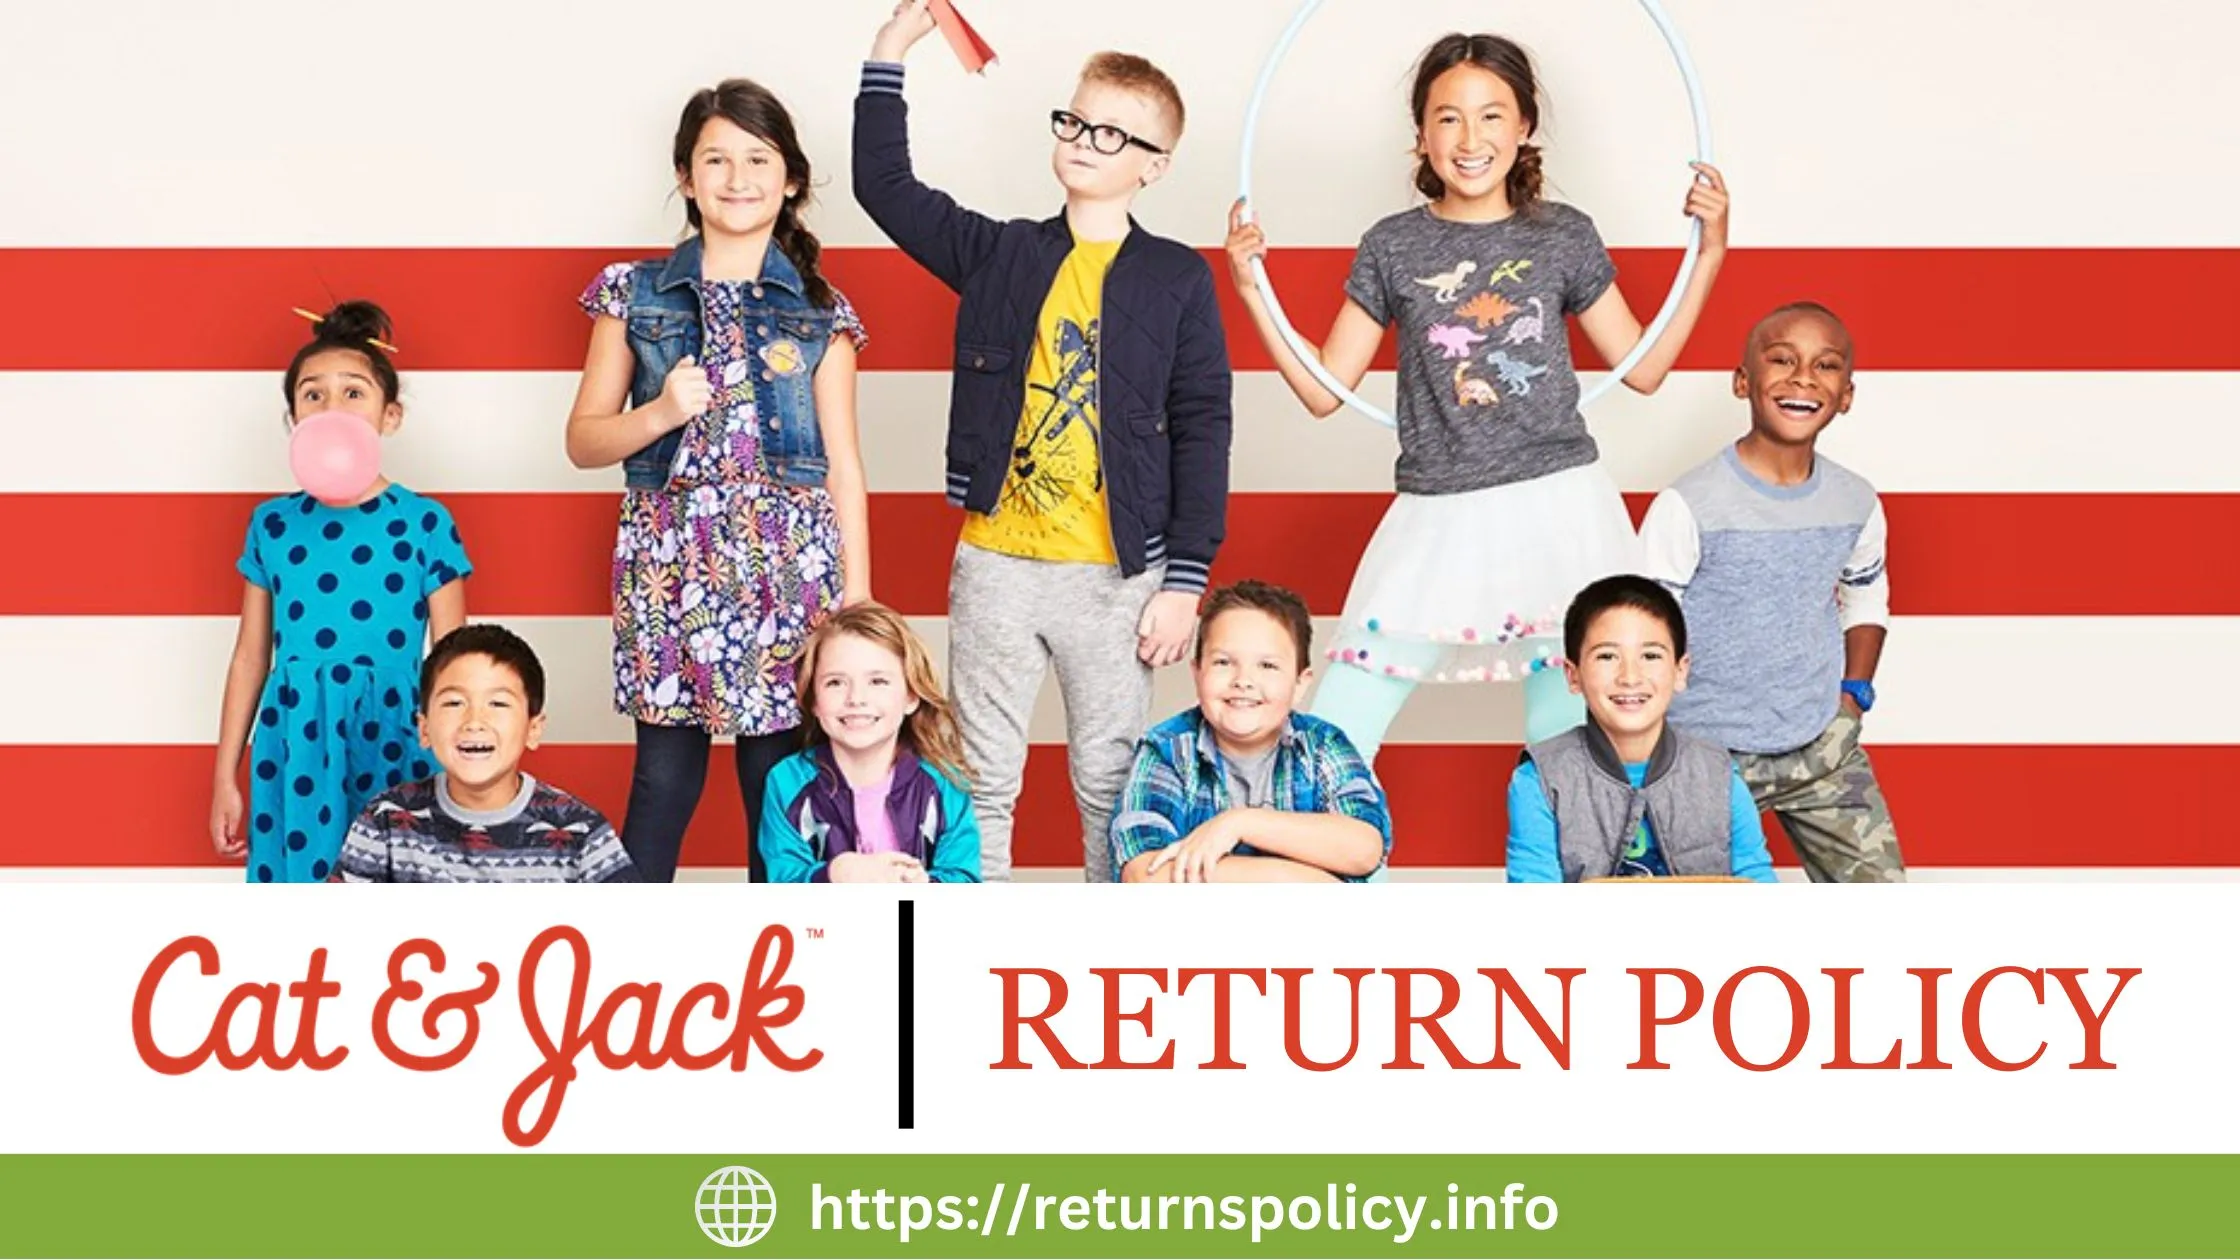 cat and jack return policy